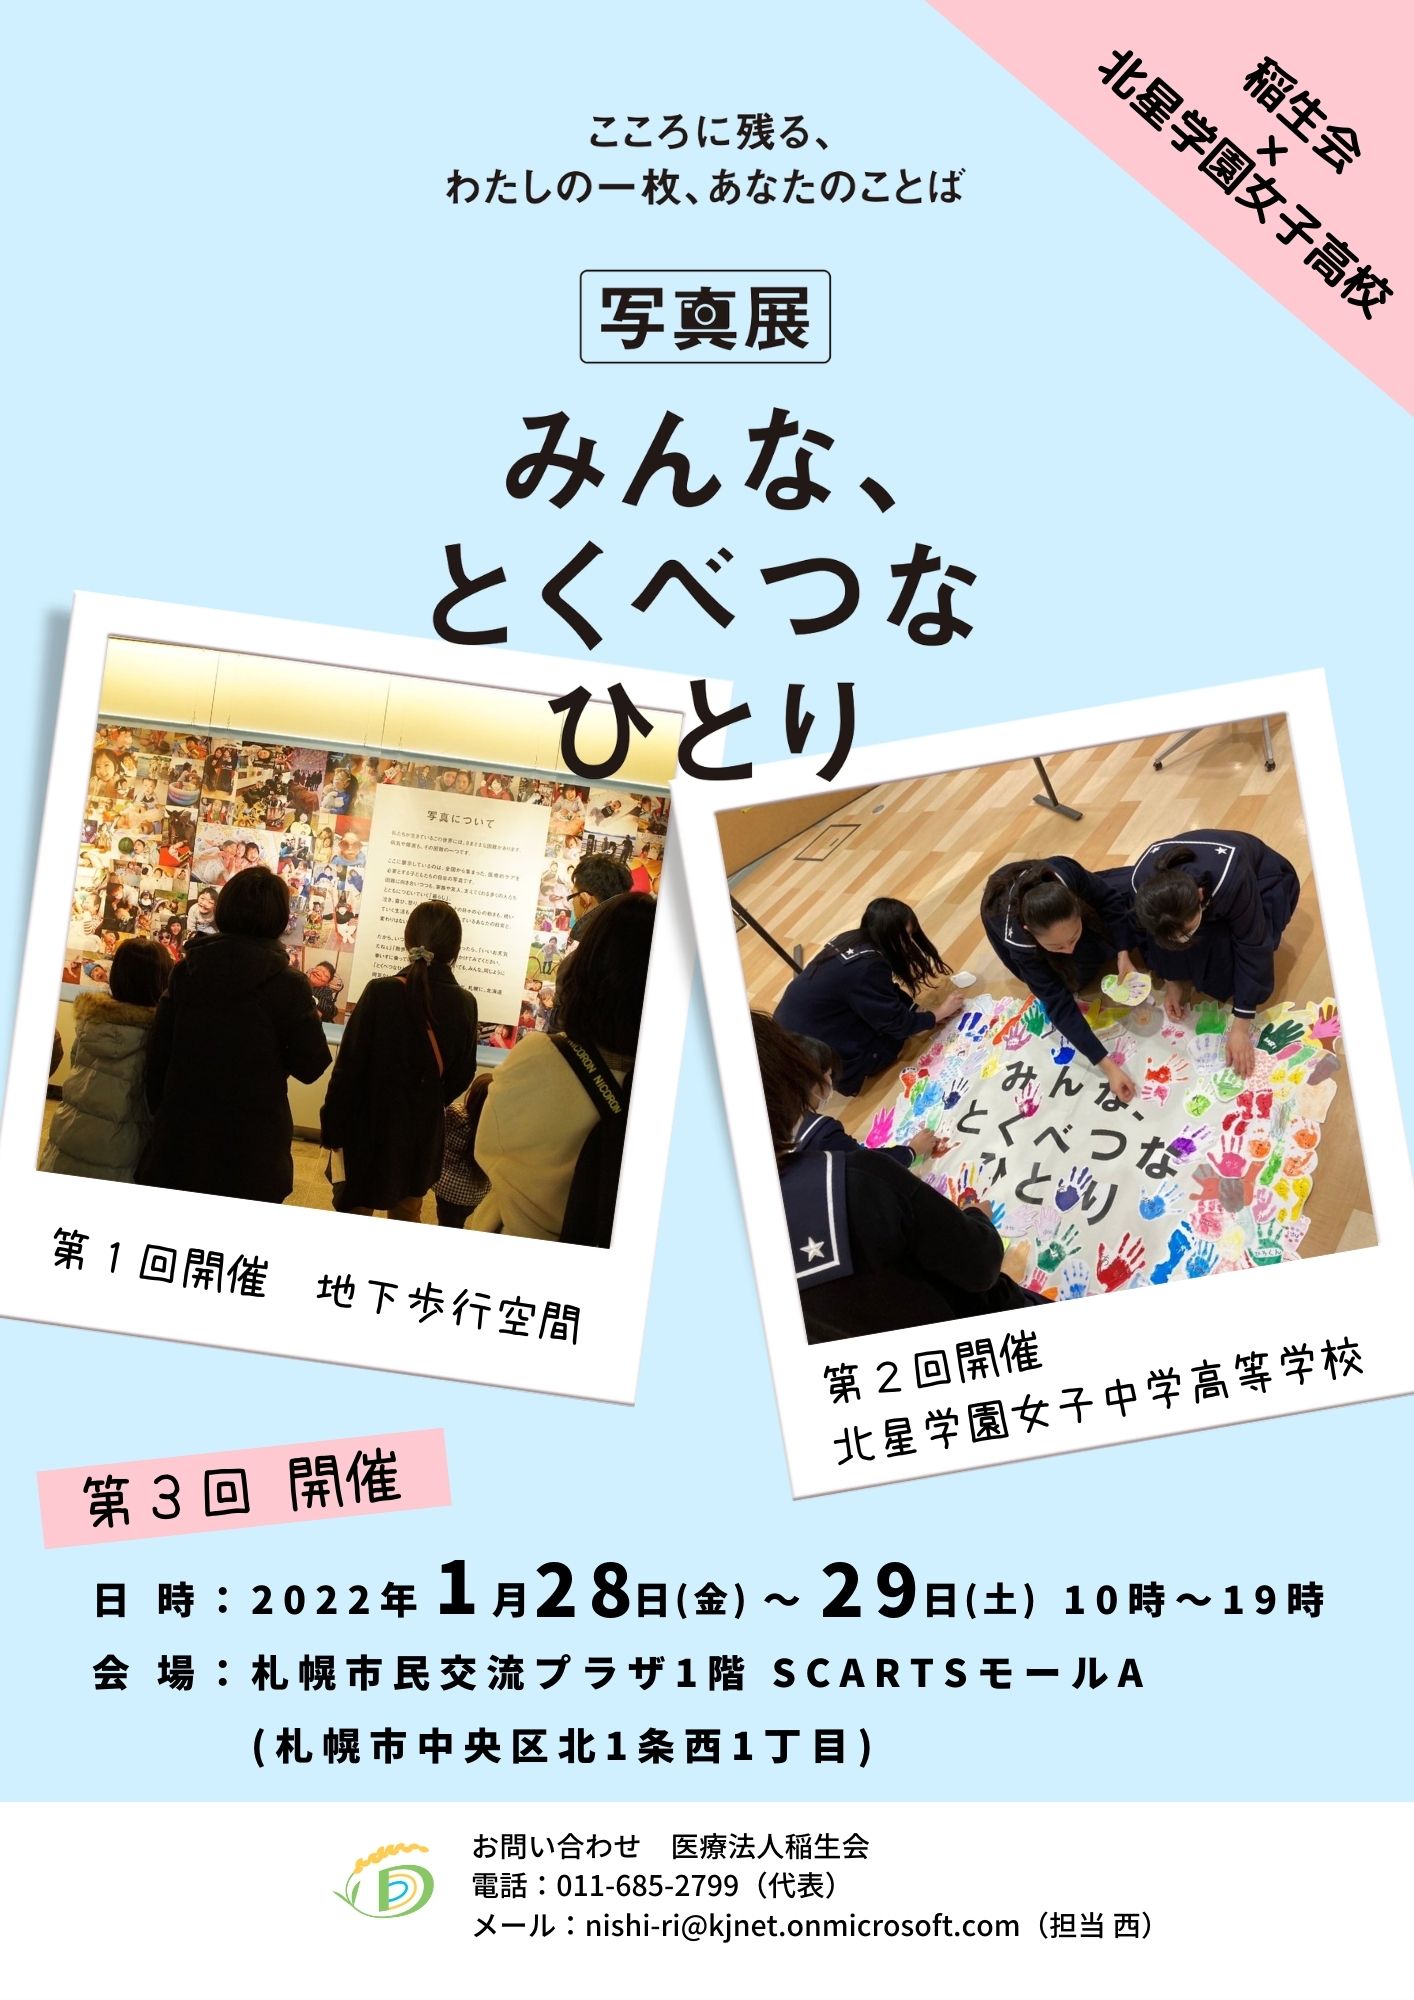 【CANCELLED】Photo Exhibition: Everyone is Special image